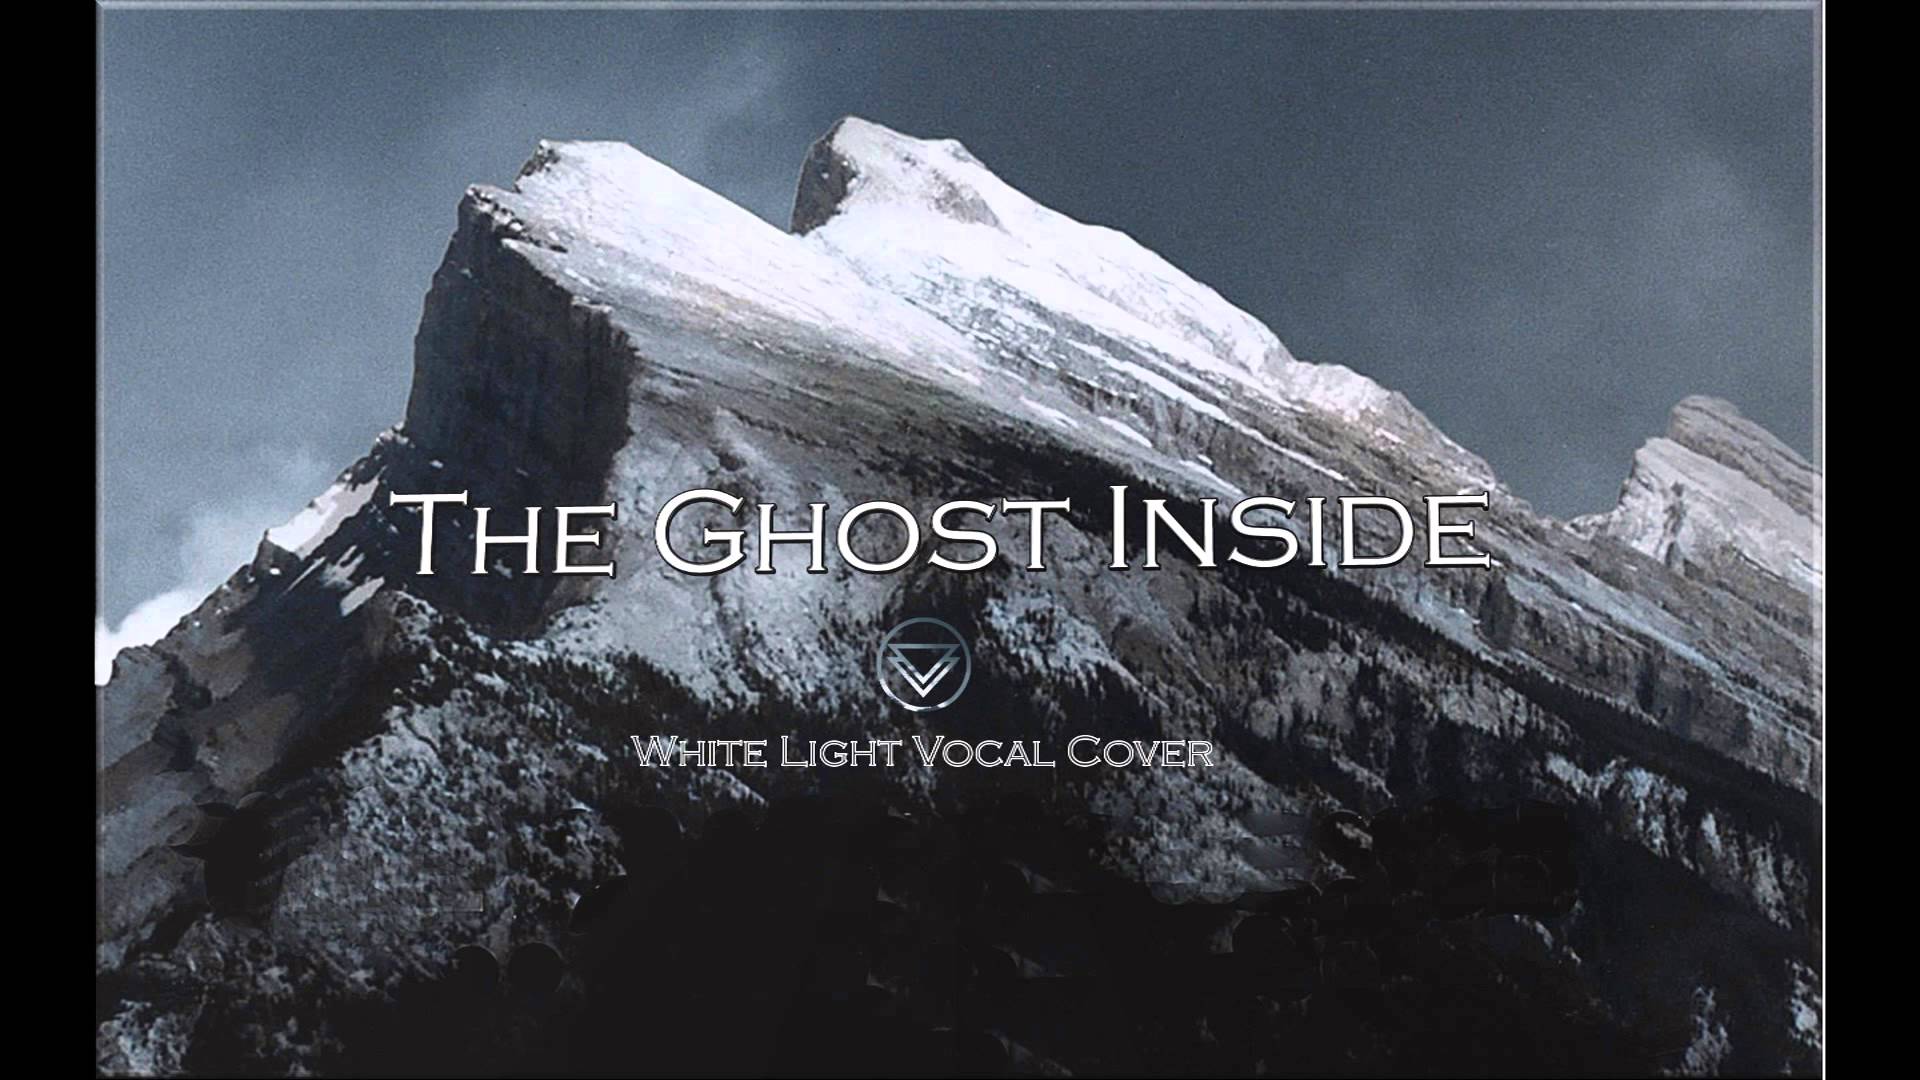 Free download The Ghost Inside White Light Vocal Cover 1920x1080